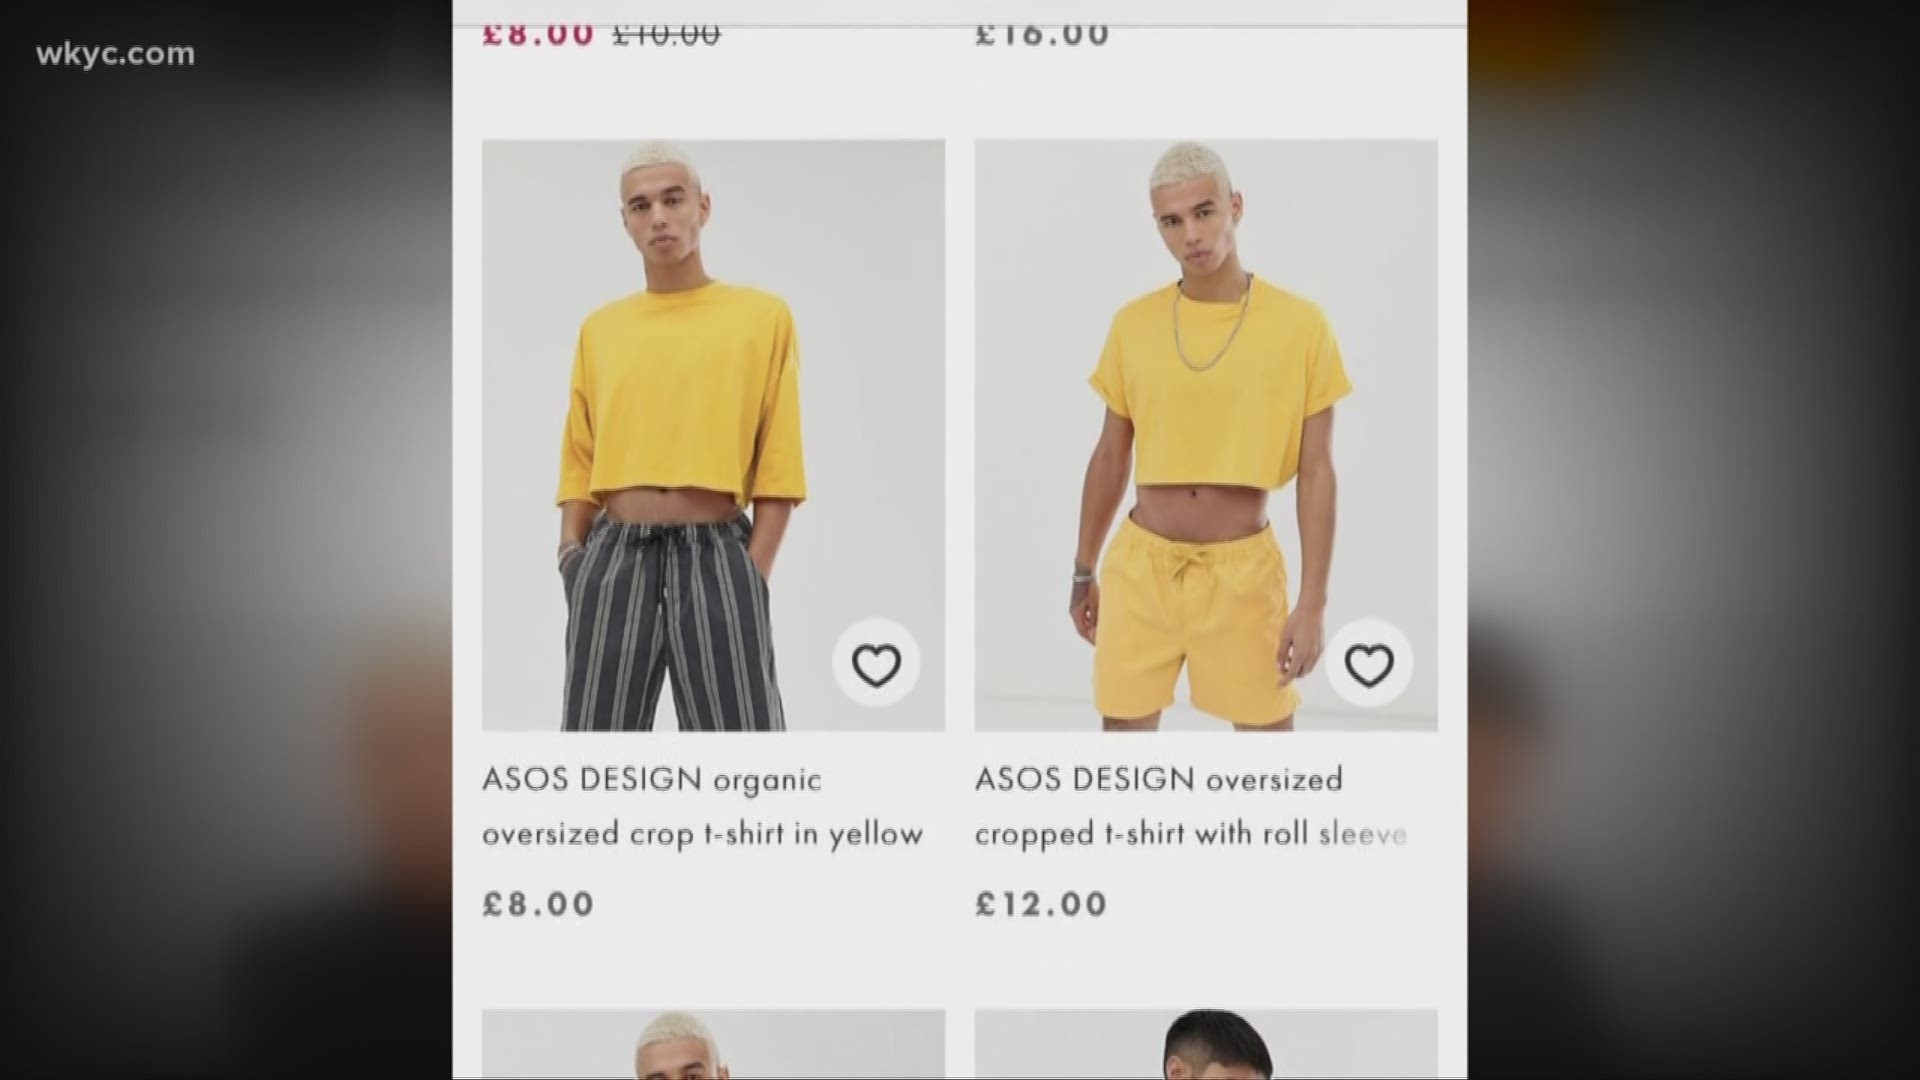 Fashion company ASOS has been making headlines for a couple weeks now, after social media hawks spotted crops and tube tops for men for sale on their website.